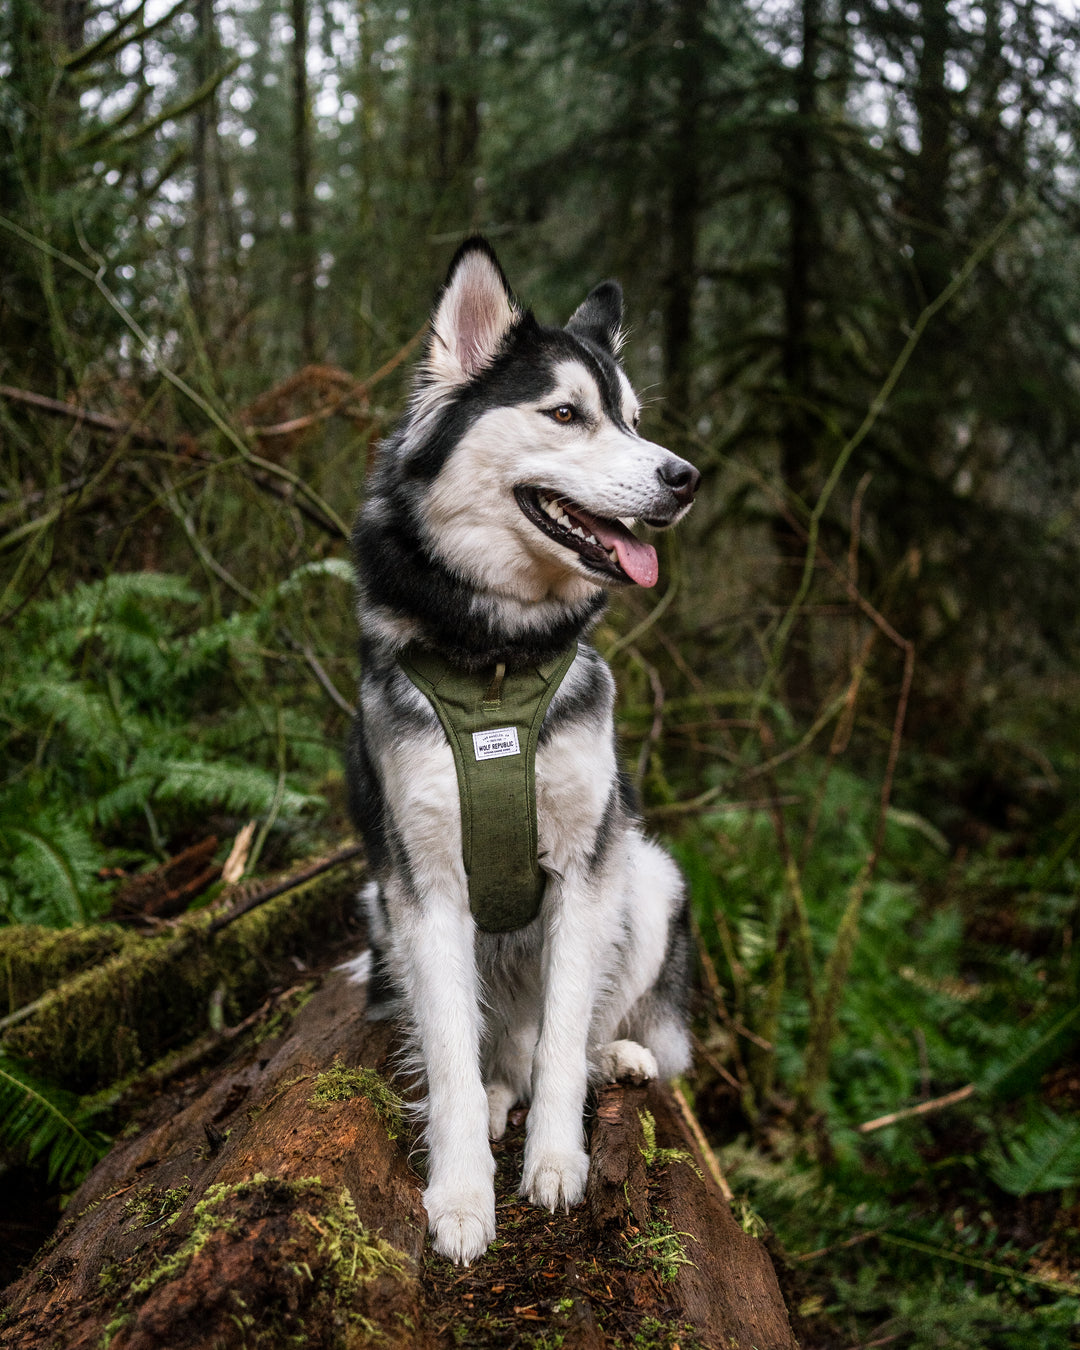 A husky sits on a fallen log laying in the forest wearing a dark green harness